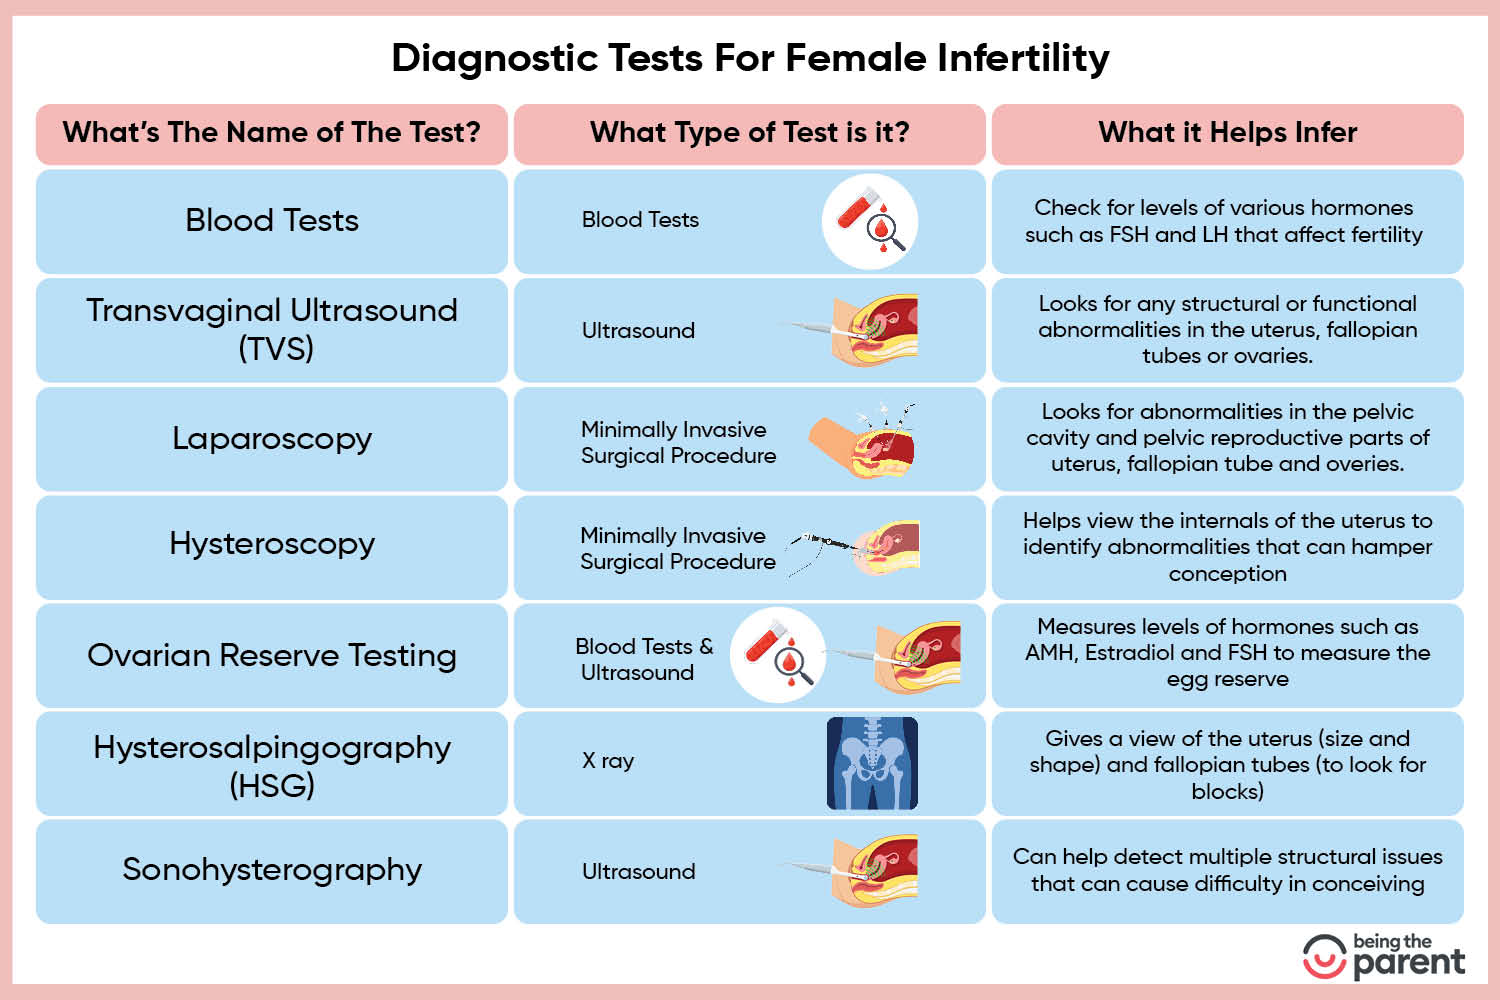 List of tests for female infertility